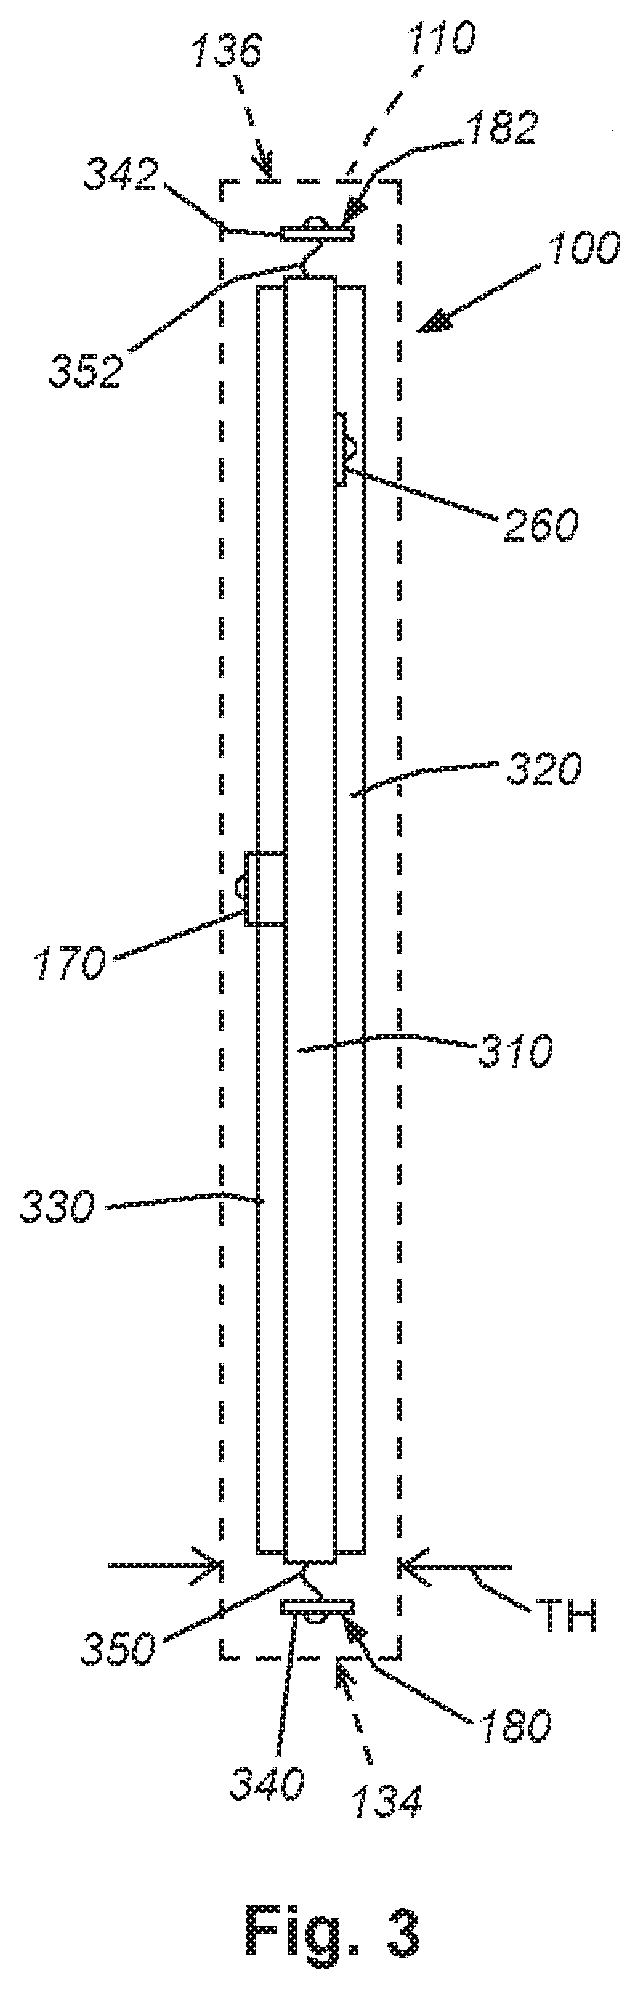 System and method for providing wide-area imaging and communications capability to a handheld device